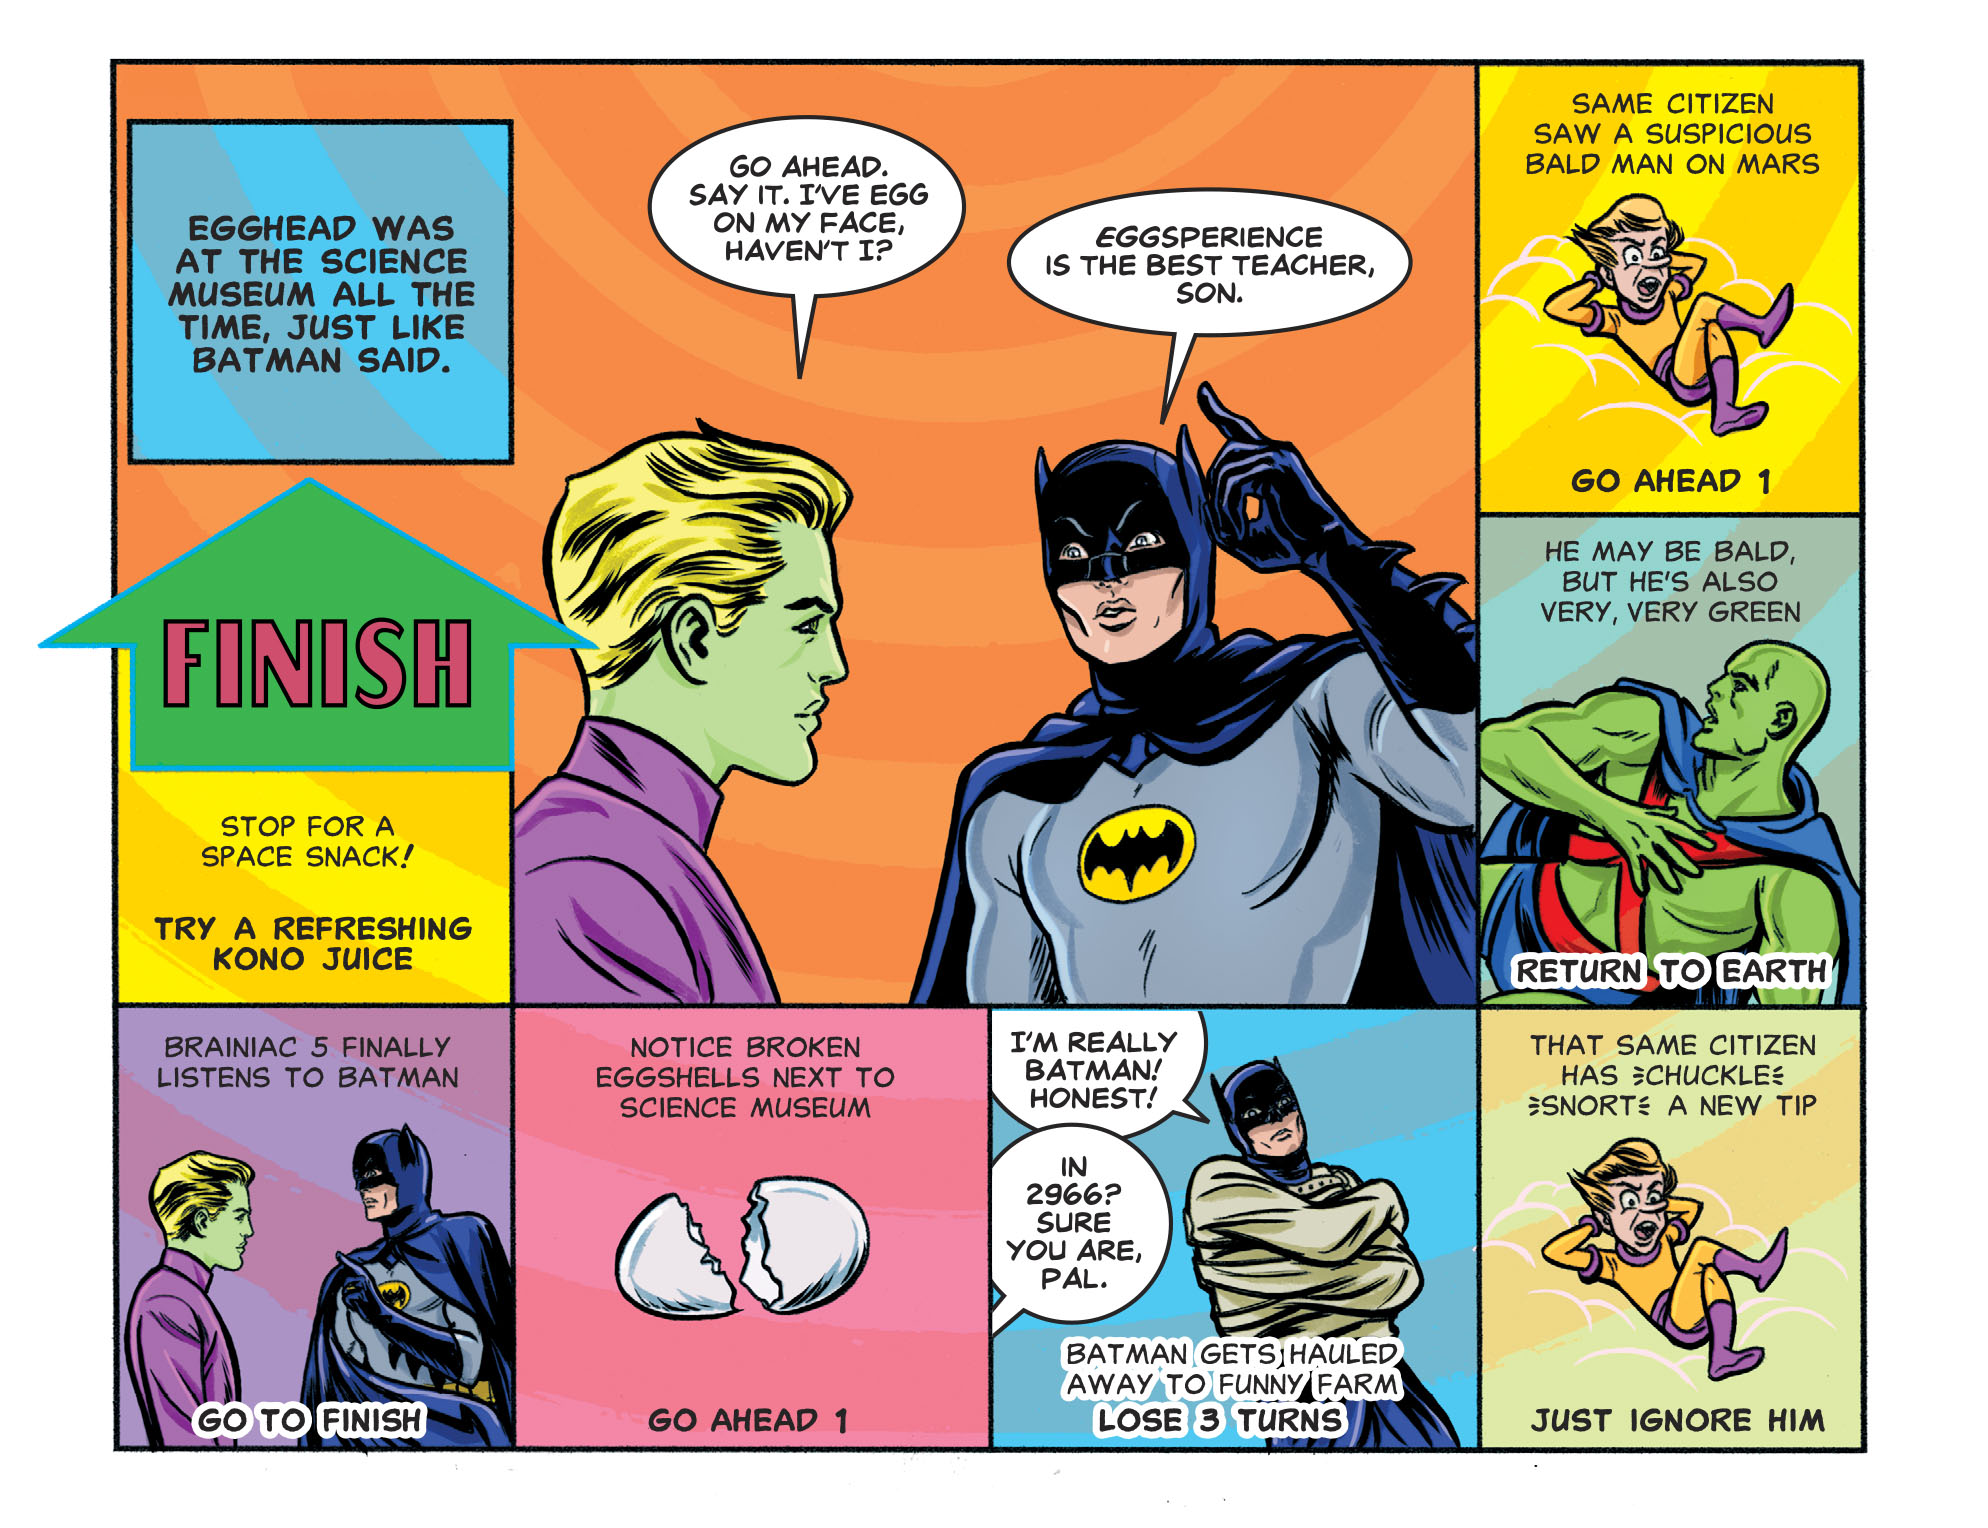 Batman ’66 Met The Legion Of Super-Heroes and They Cramped Each Other’s Style So Bad